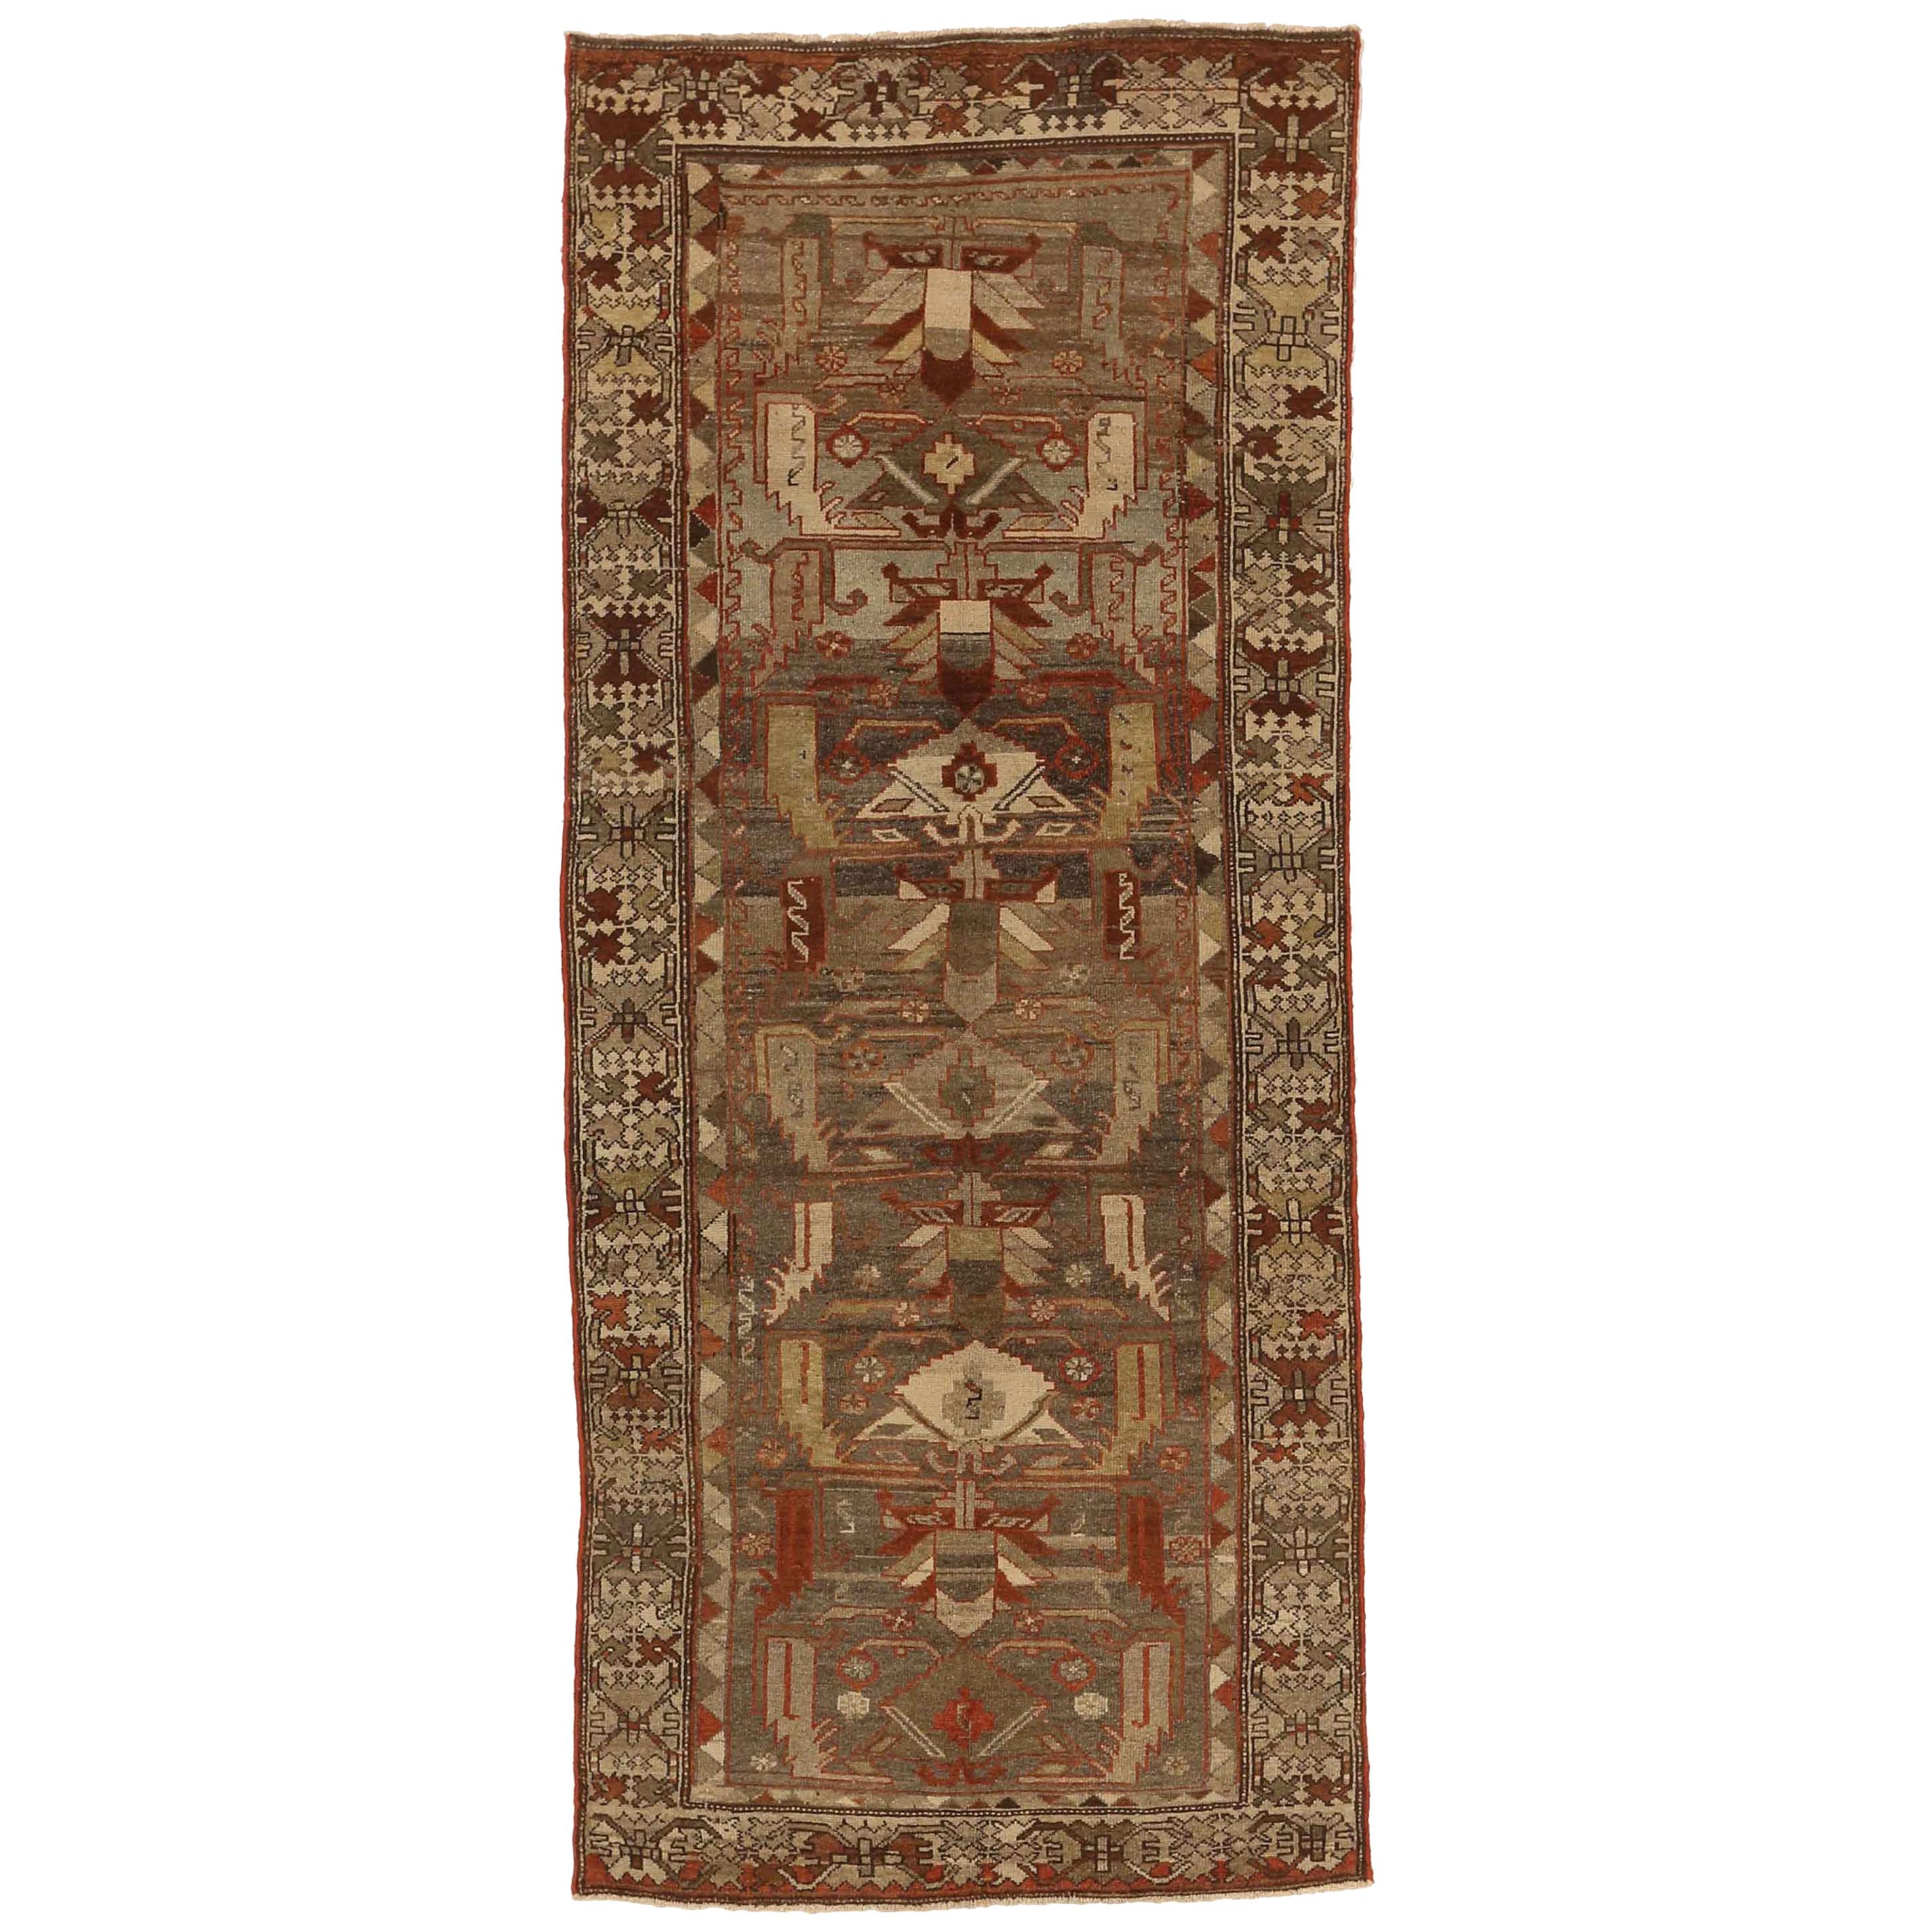 1930s Antique Persian Rug Zanjan Style With Rich Tribal and Geometric Designs For Sale